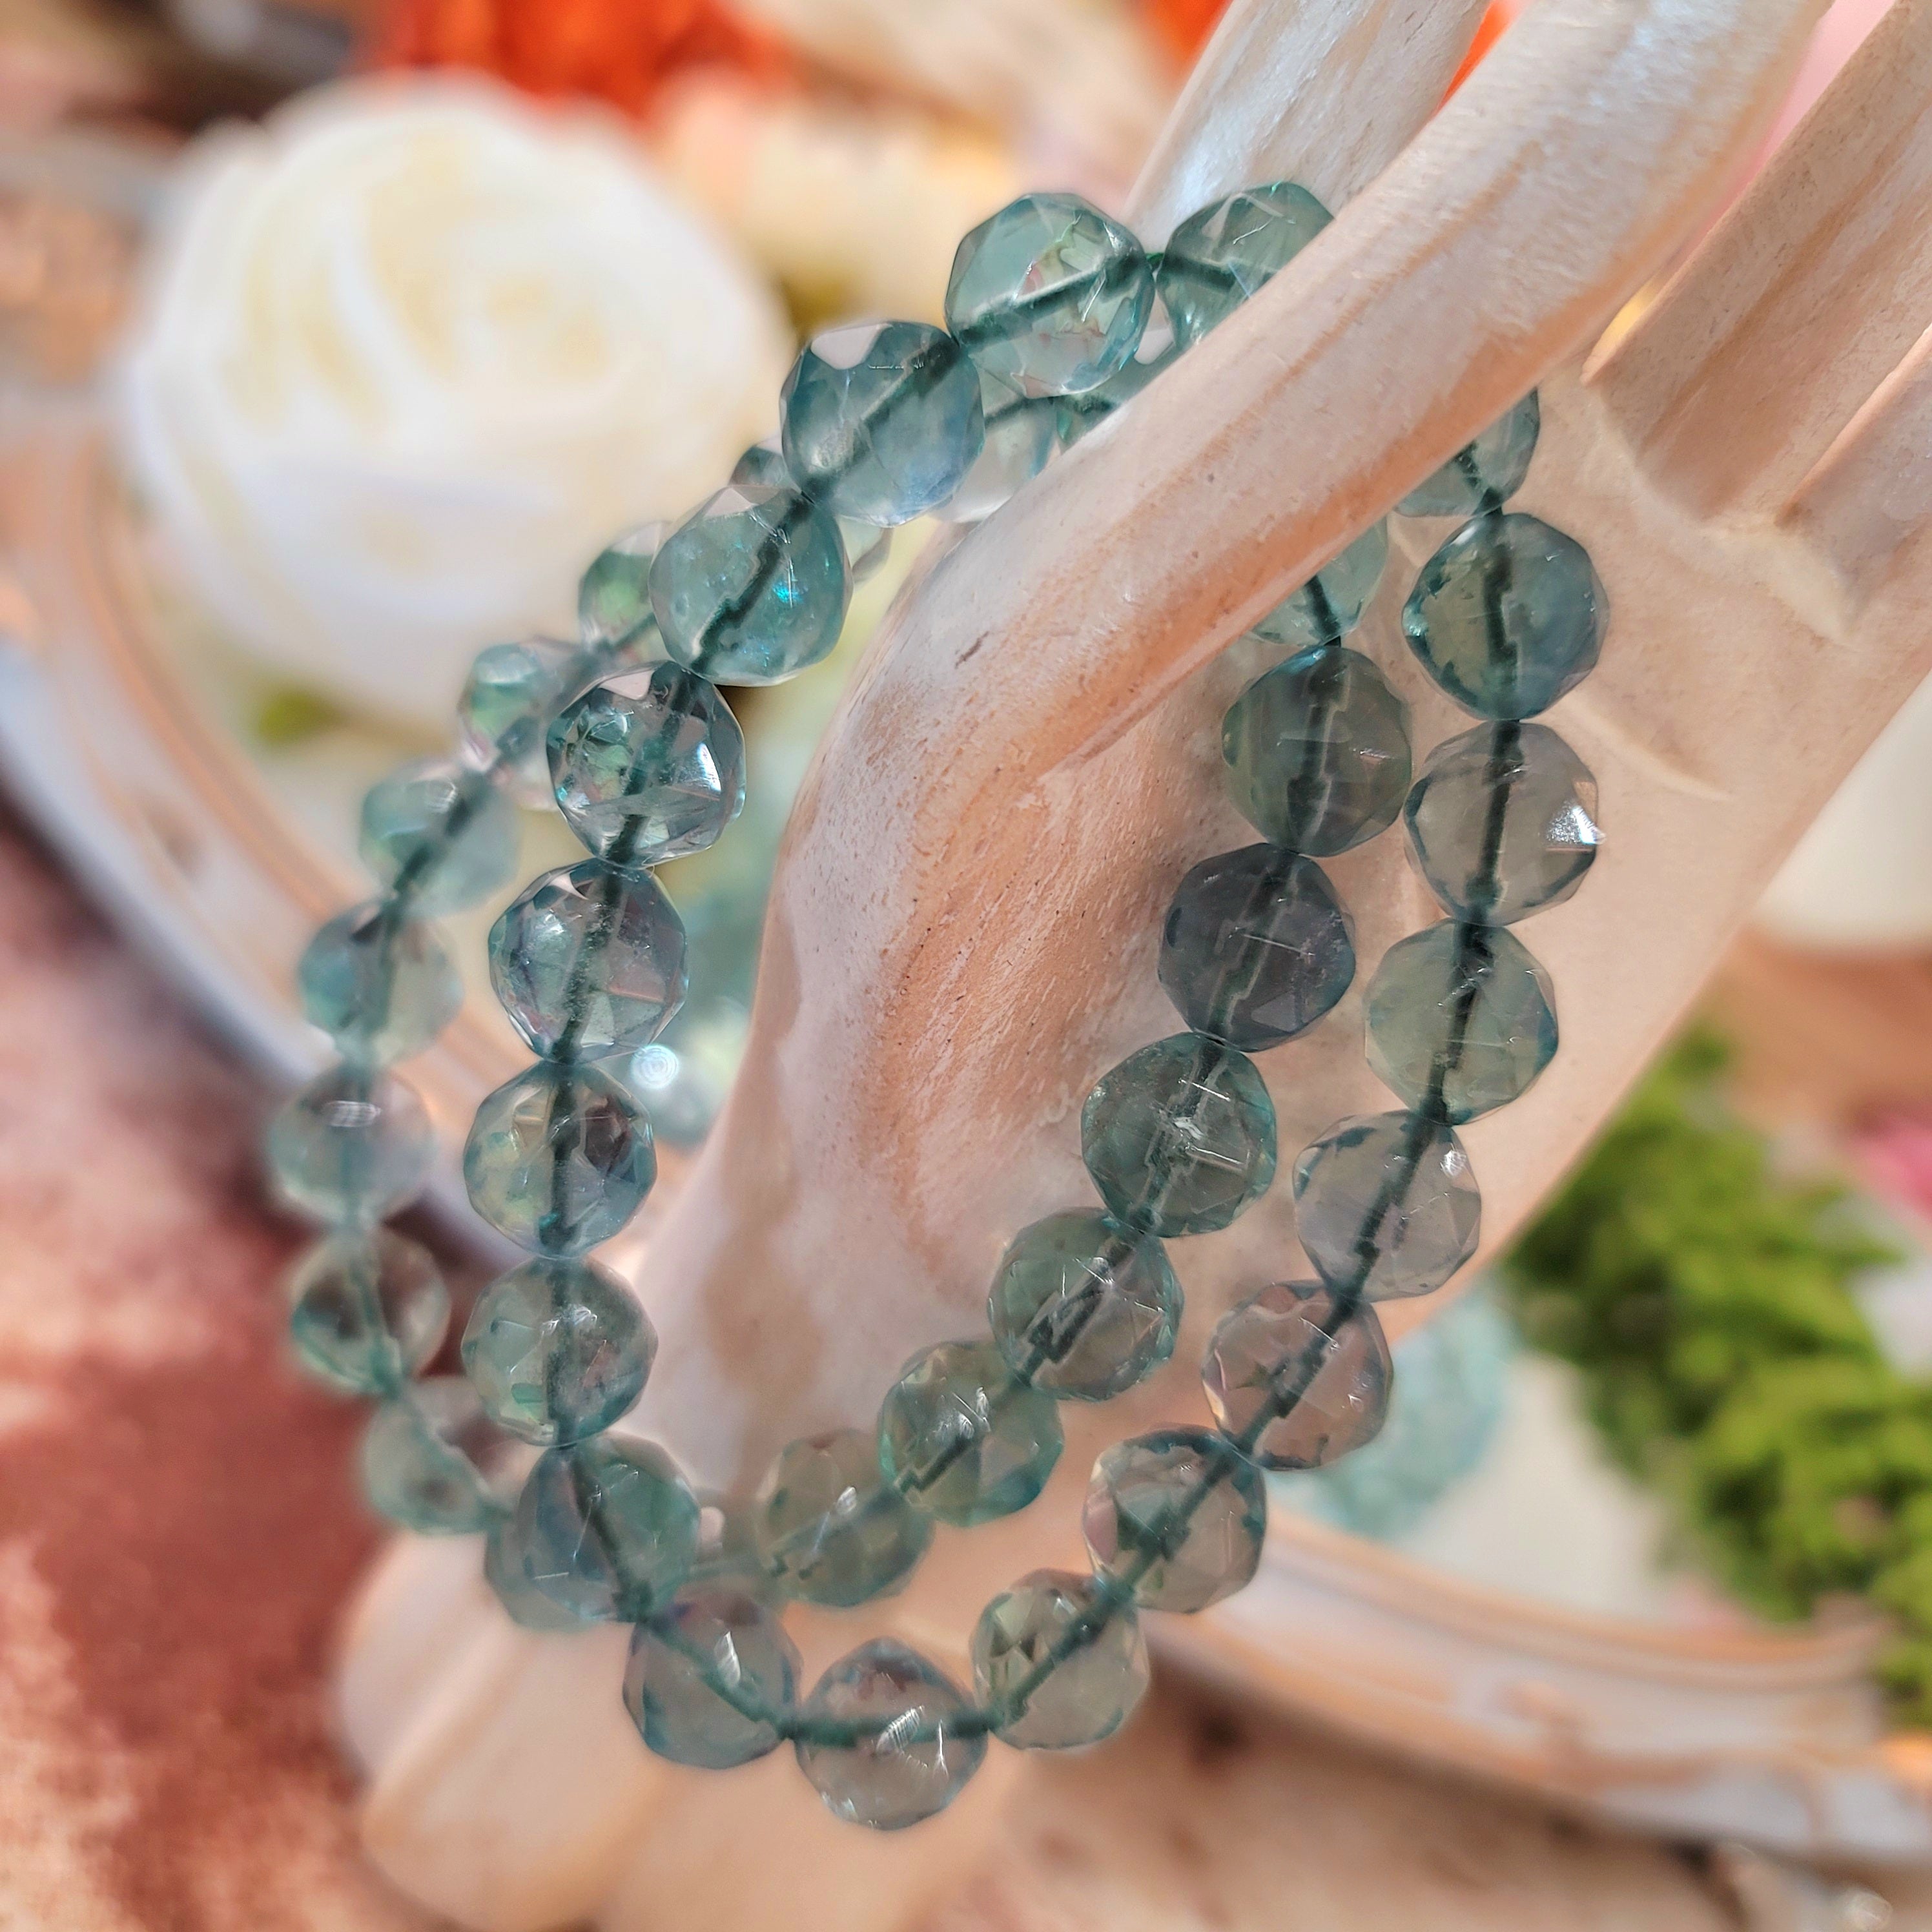 Green Fluorite Faceted Bracelet (AAA Grade) for Focus, Learning and Releasing